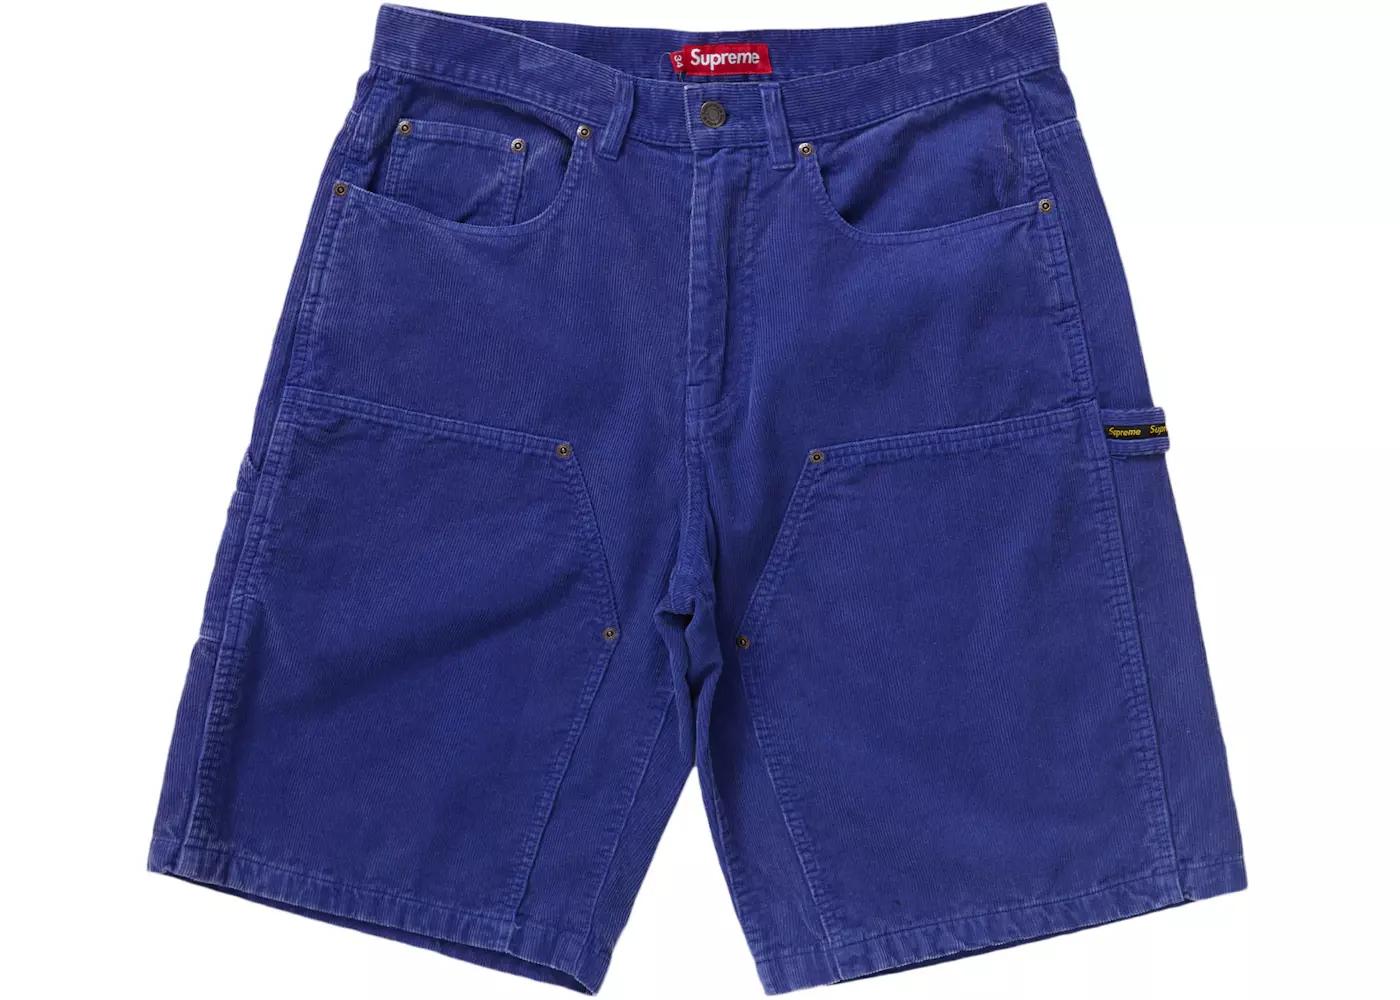 Supreme Washed Corduroy Double Knee Painter Short